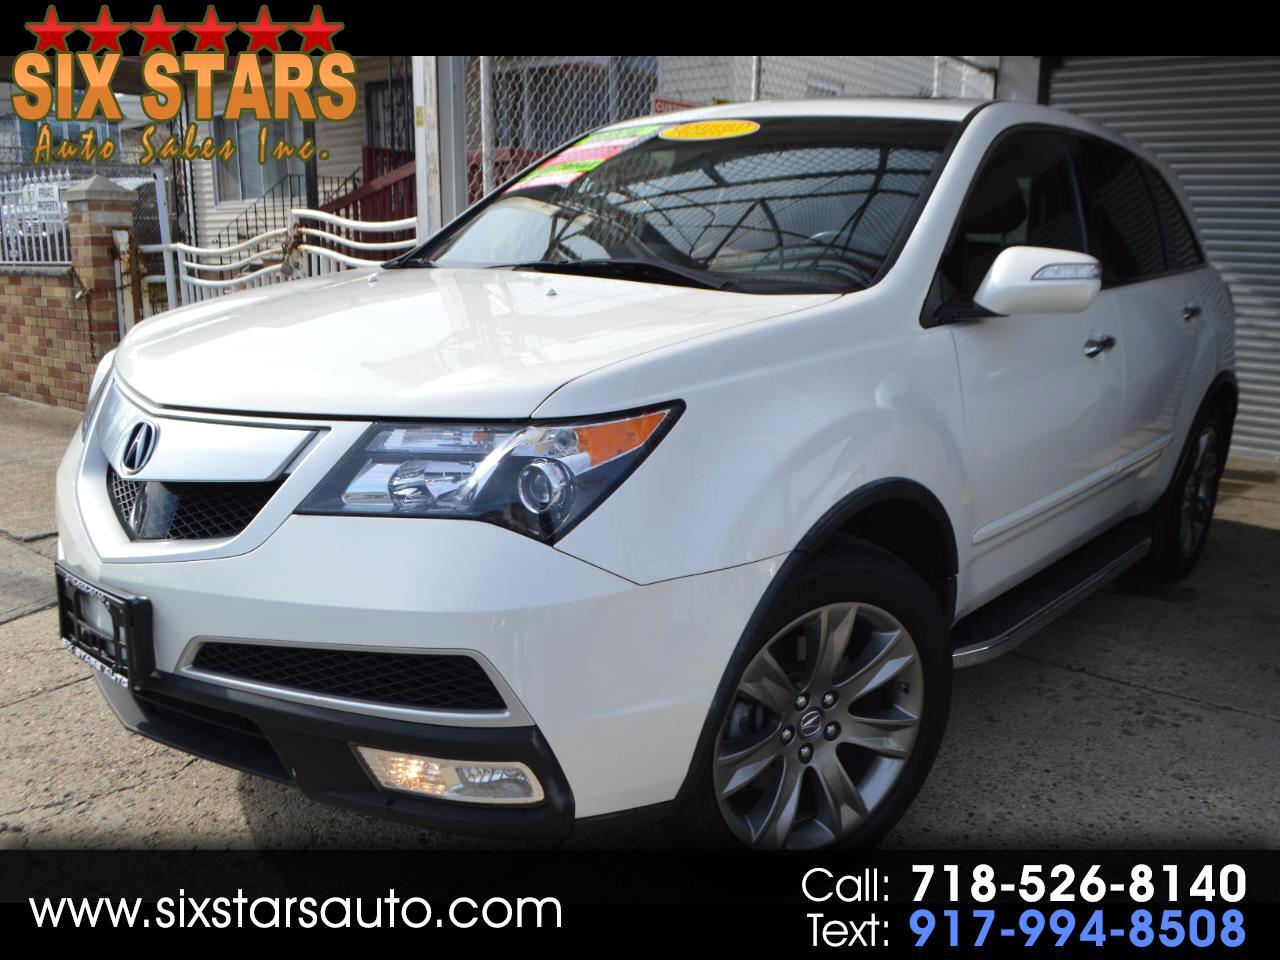 2010 acura mdx advance package